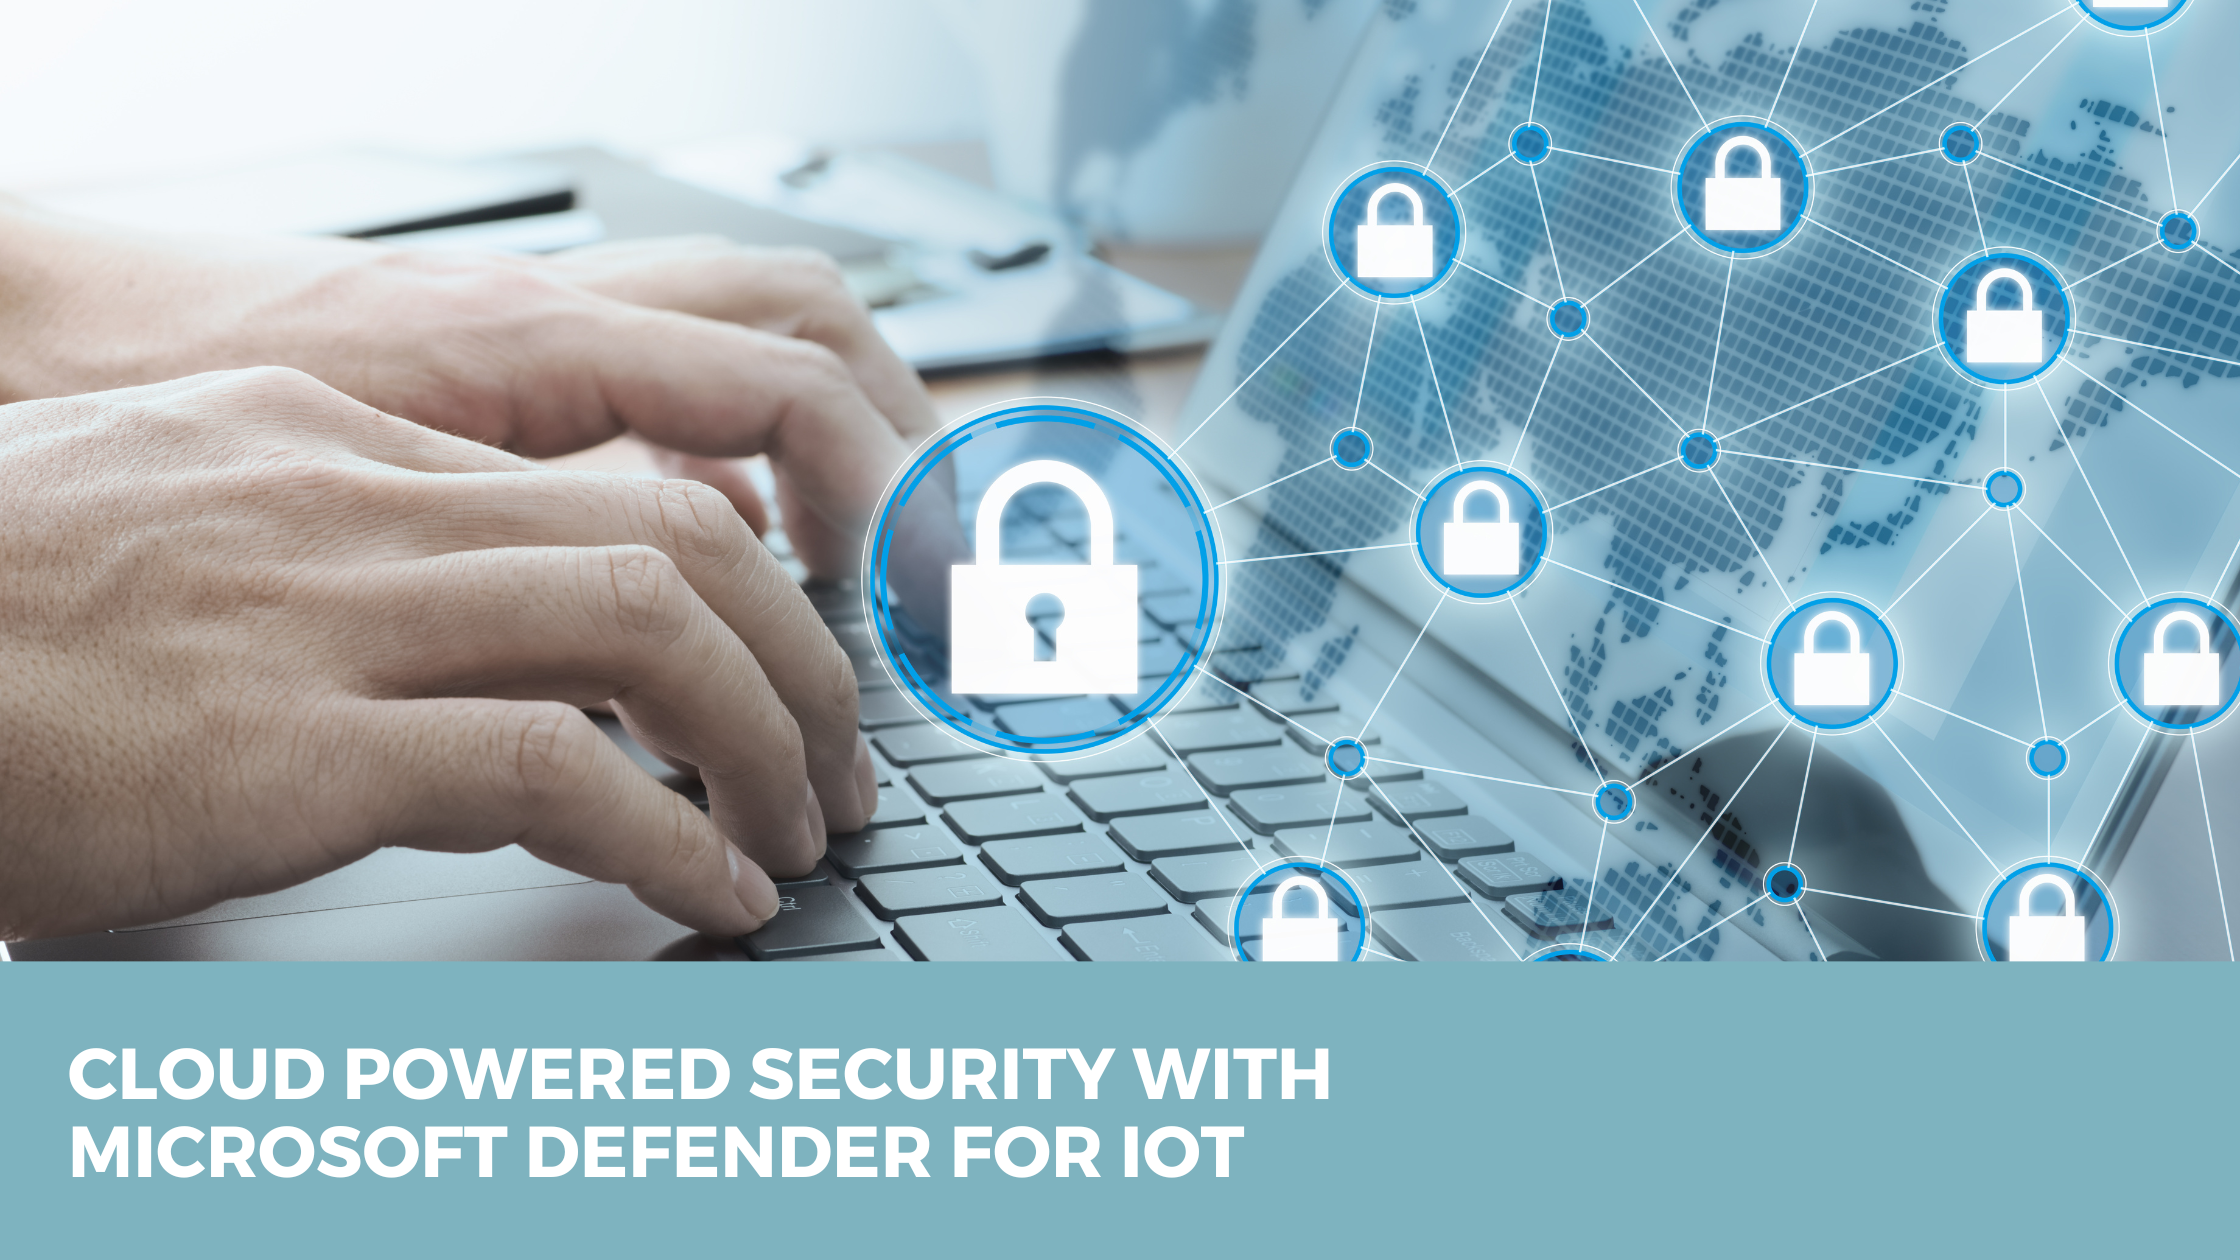 Cloud Powered Security with Microsoft Defender for IoT